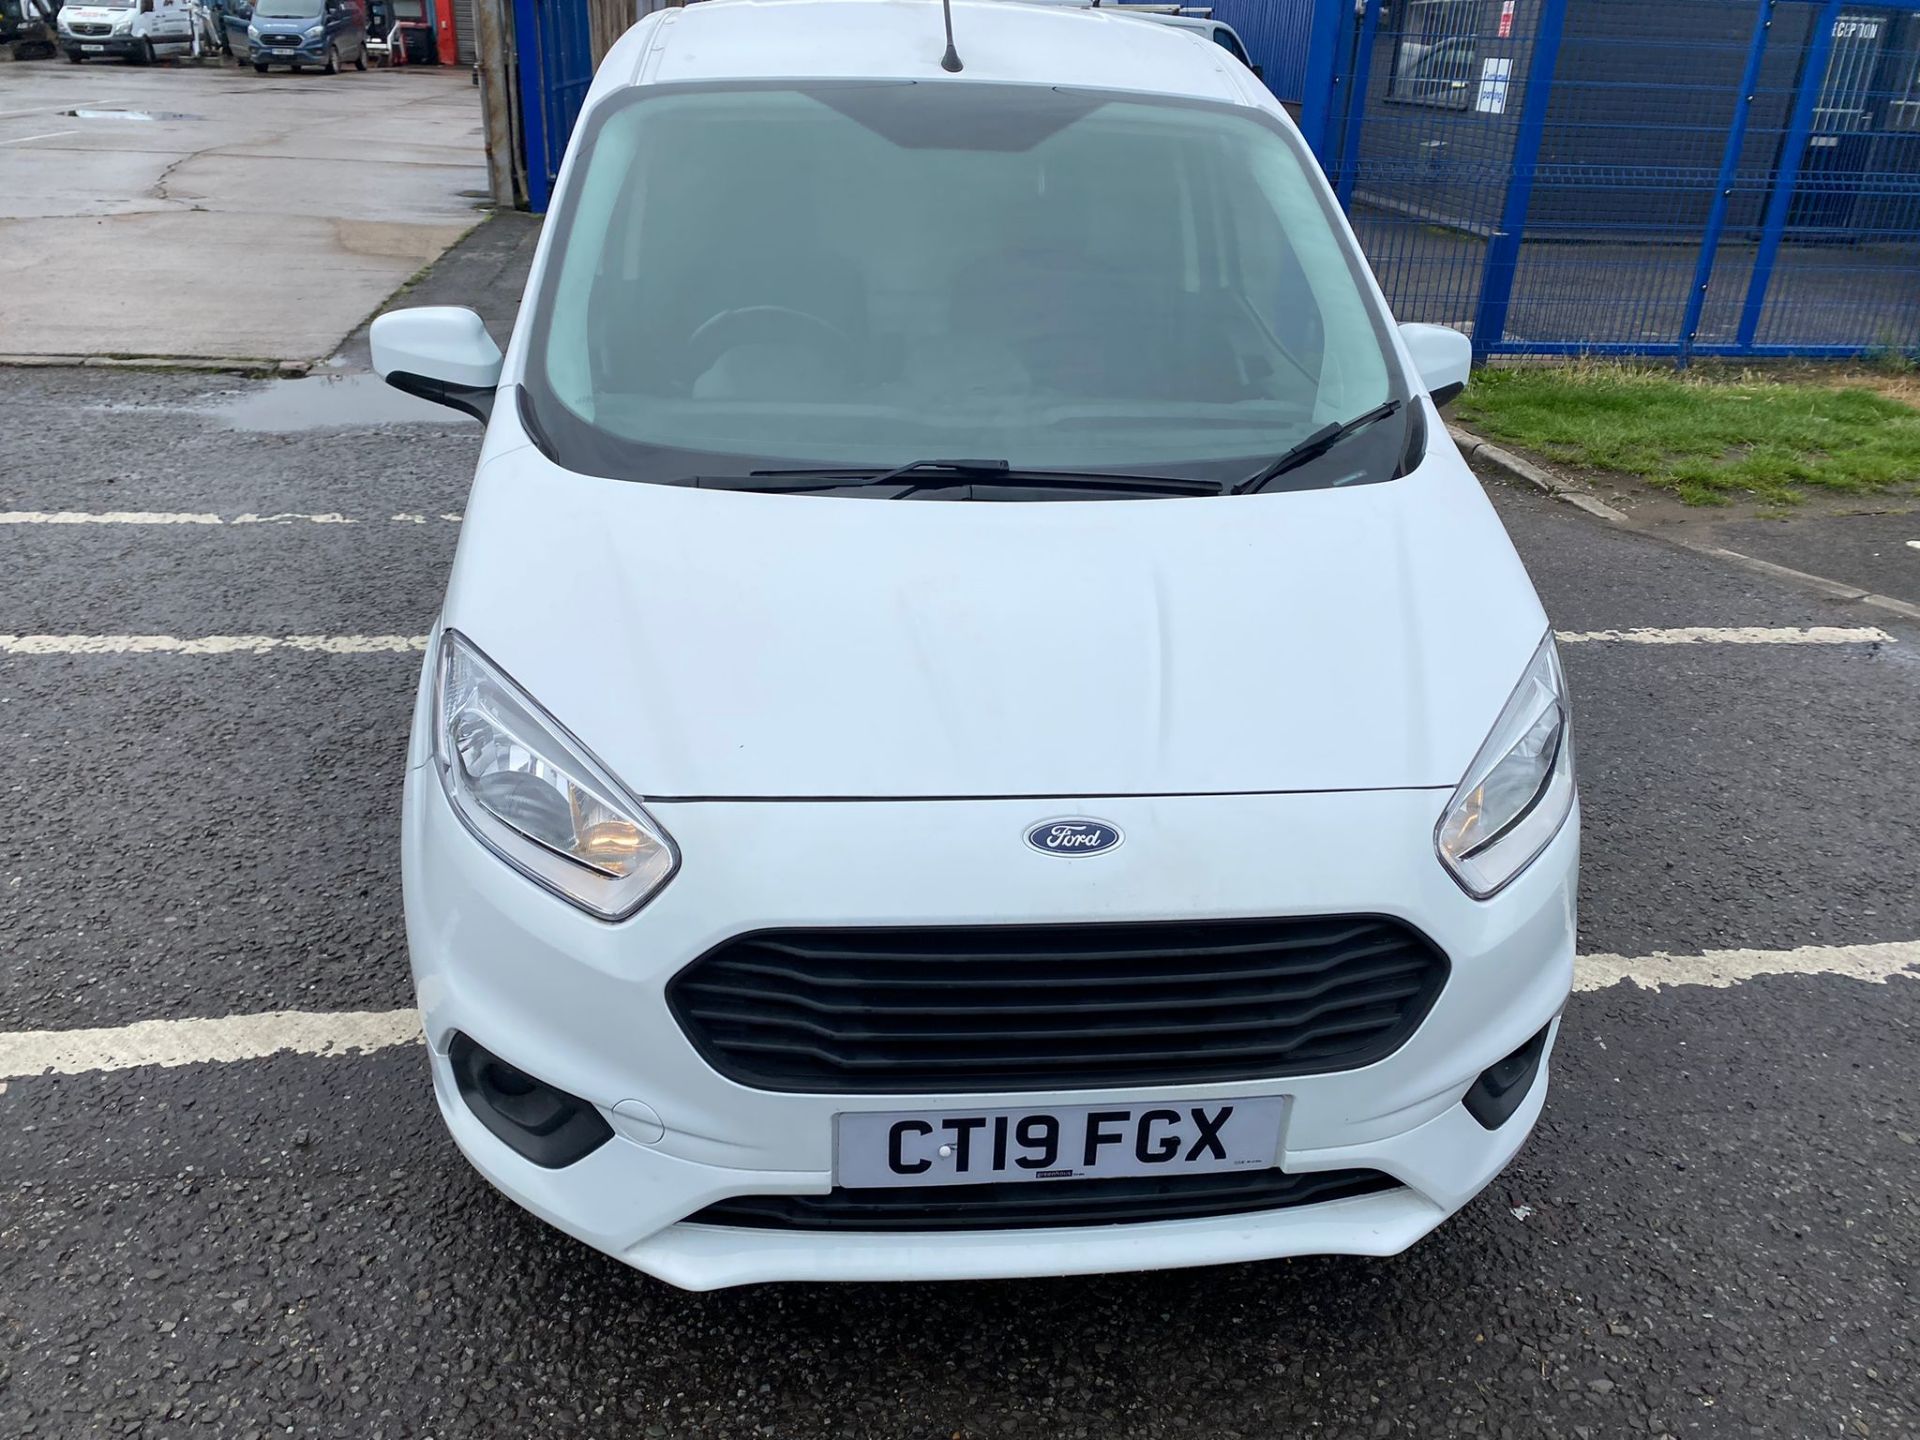 2019 19 FORD TRANSIT COURIER LIMITED PANEL VAN - ALLOY WHEELS - AIR CON - EURO 6. - Image 2 of 10